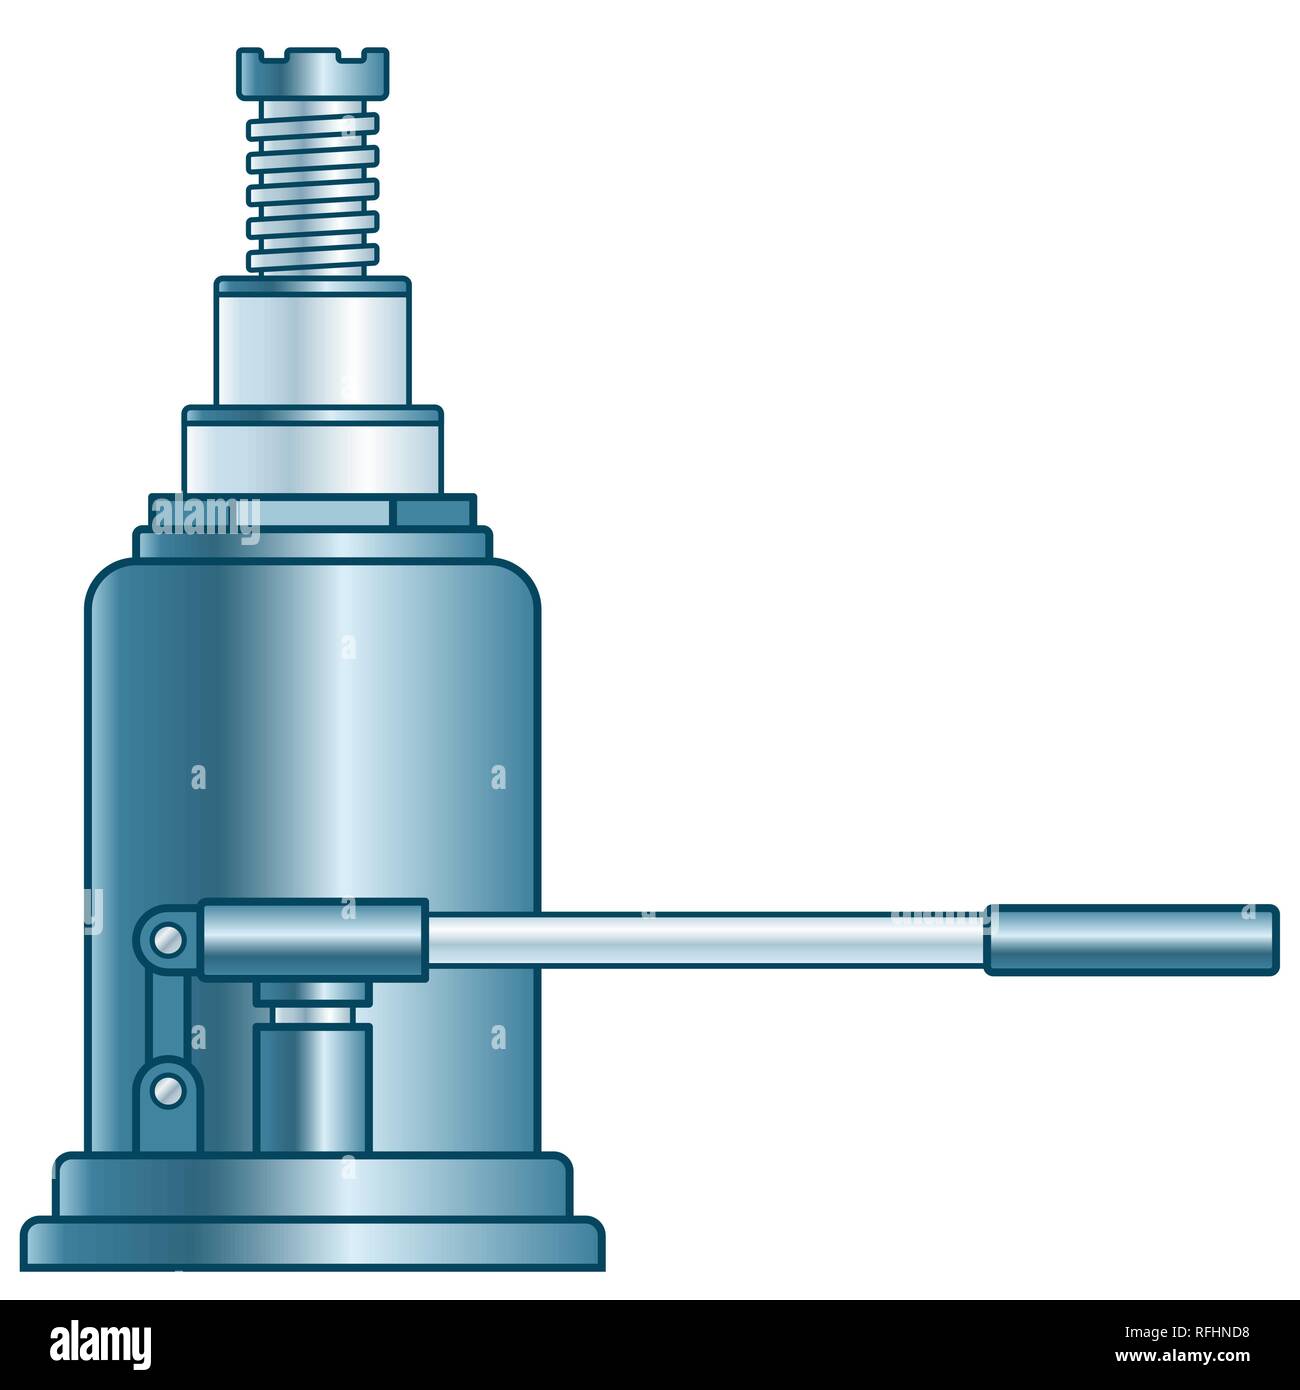 Illustration of the hydraulic lifting jack Stock Vector